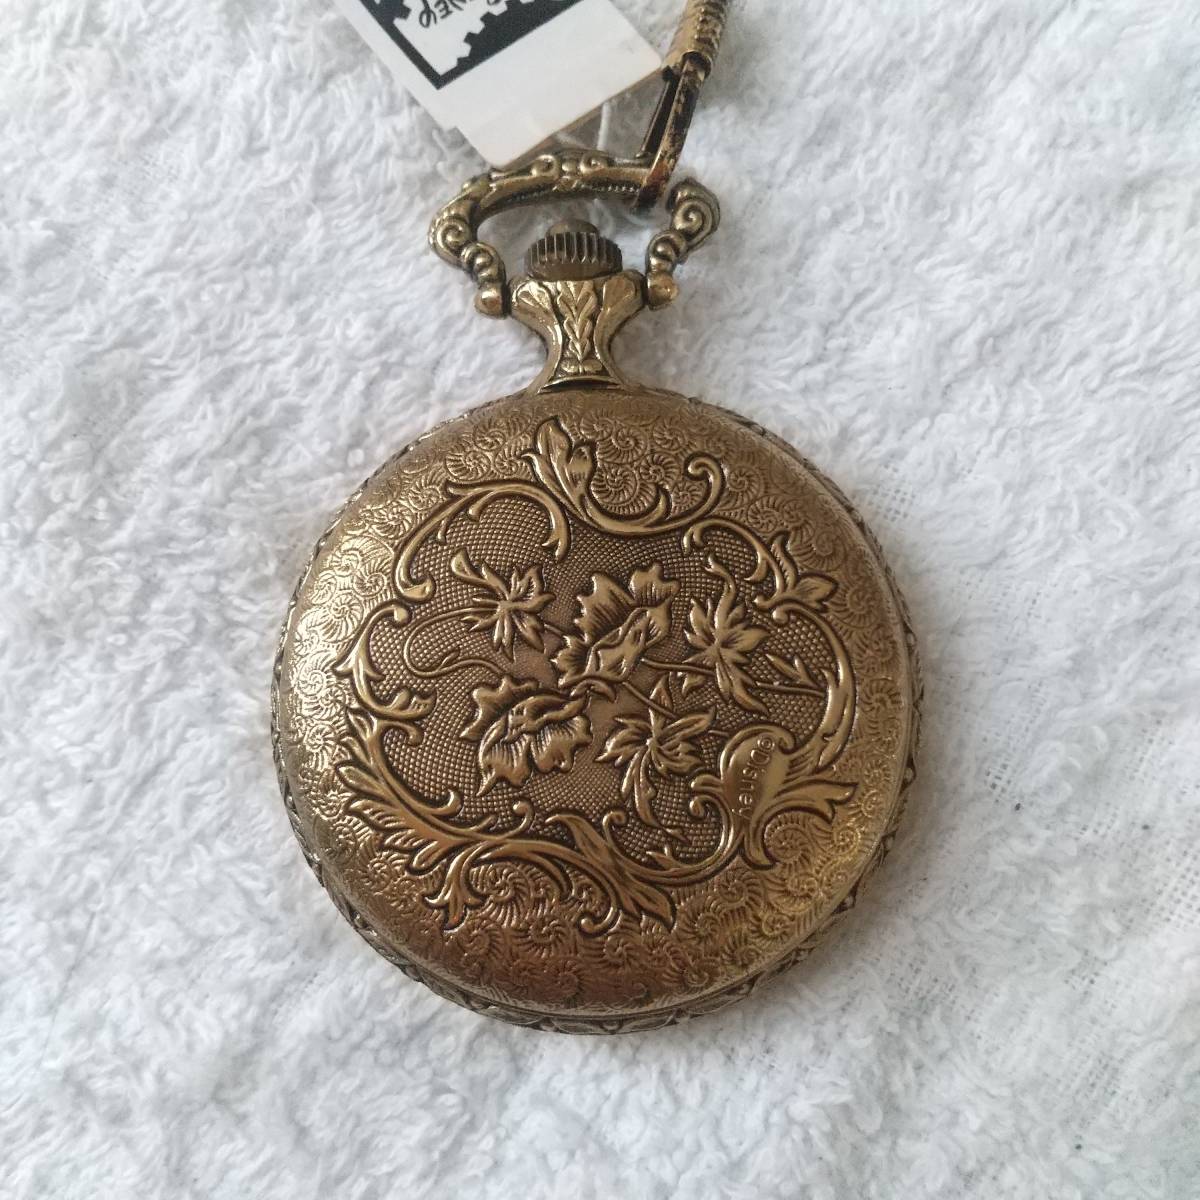  Mickey Mouse railroad pocket watch Sutton Time America made mongome Lee dial 